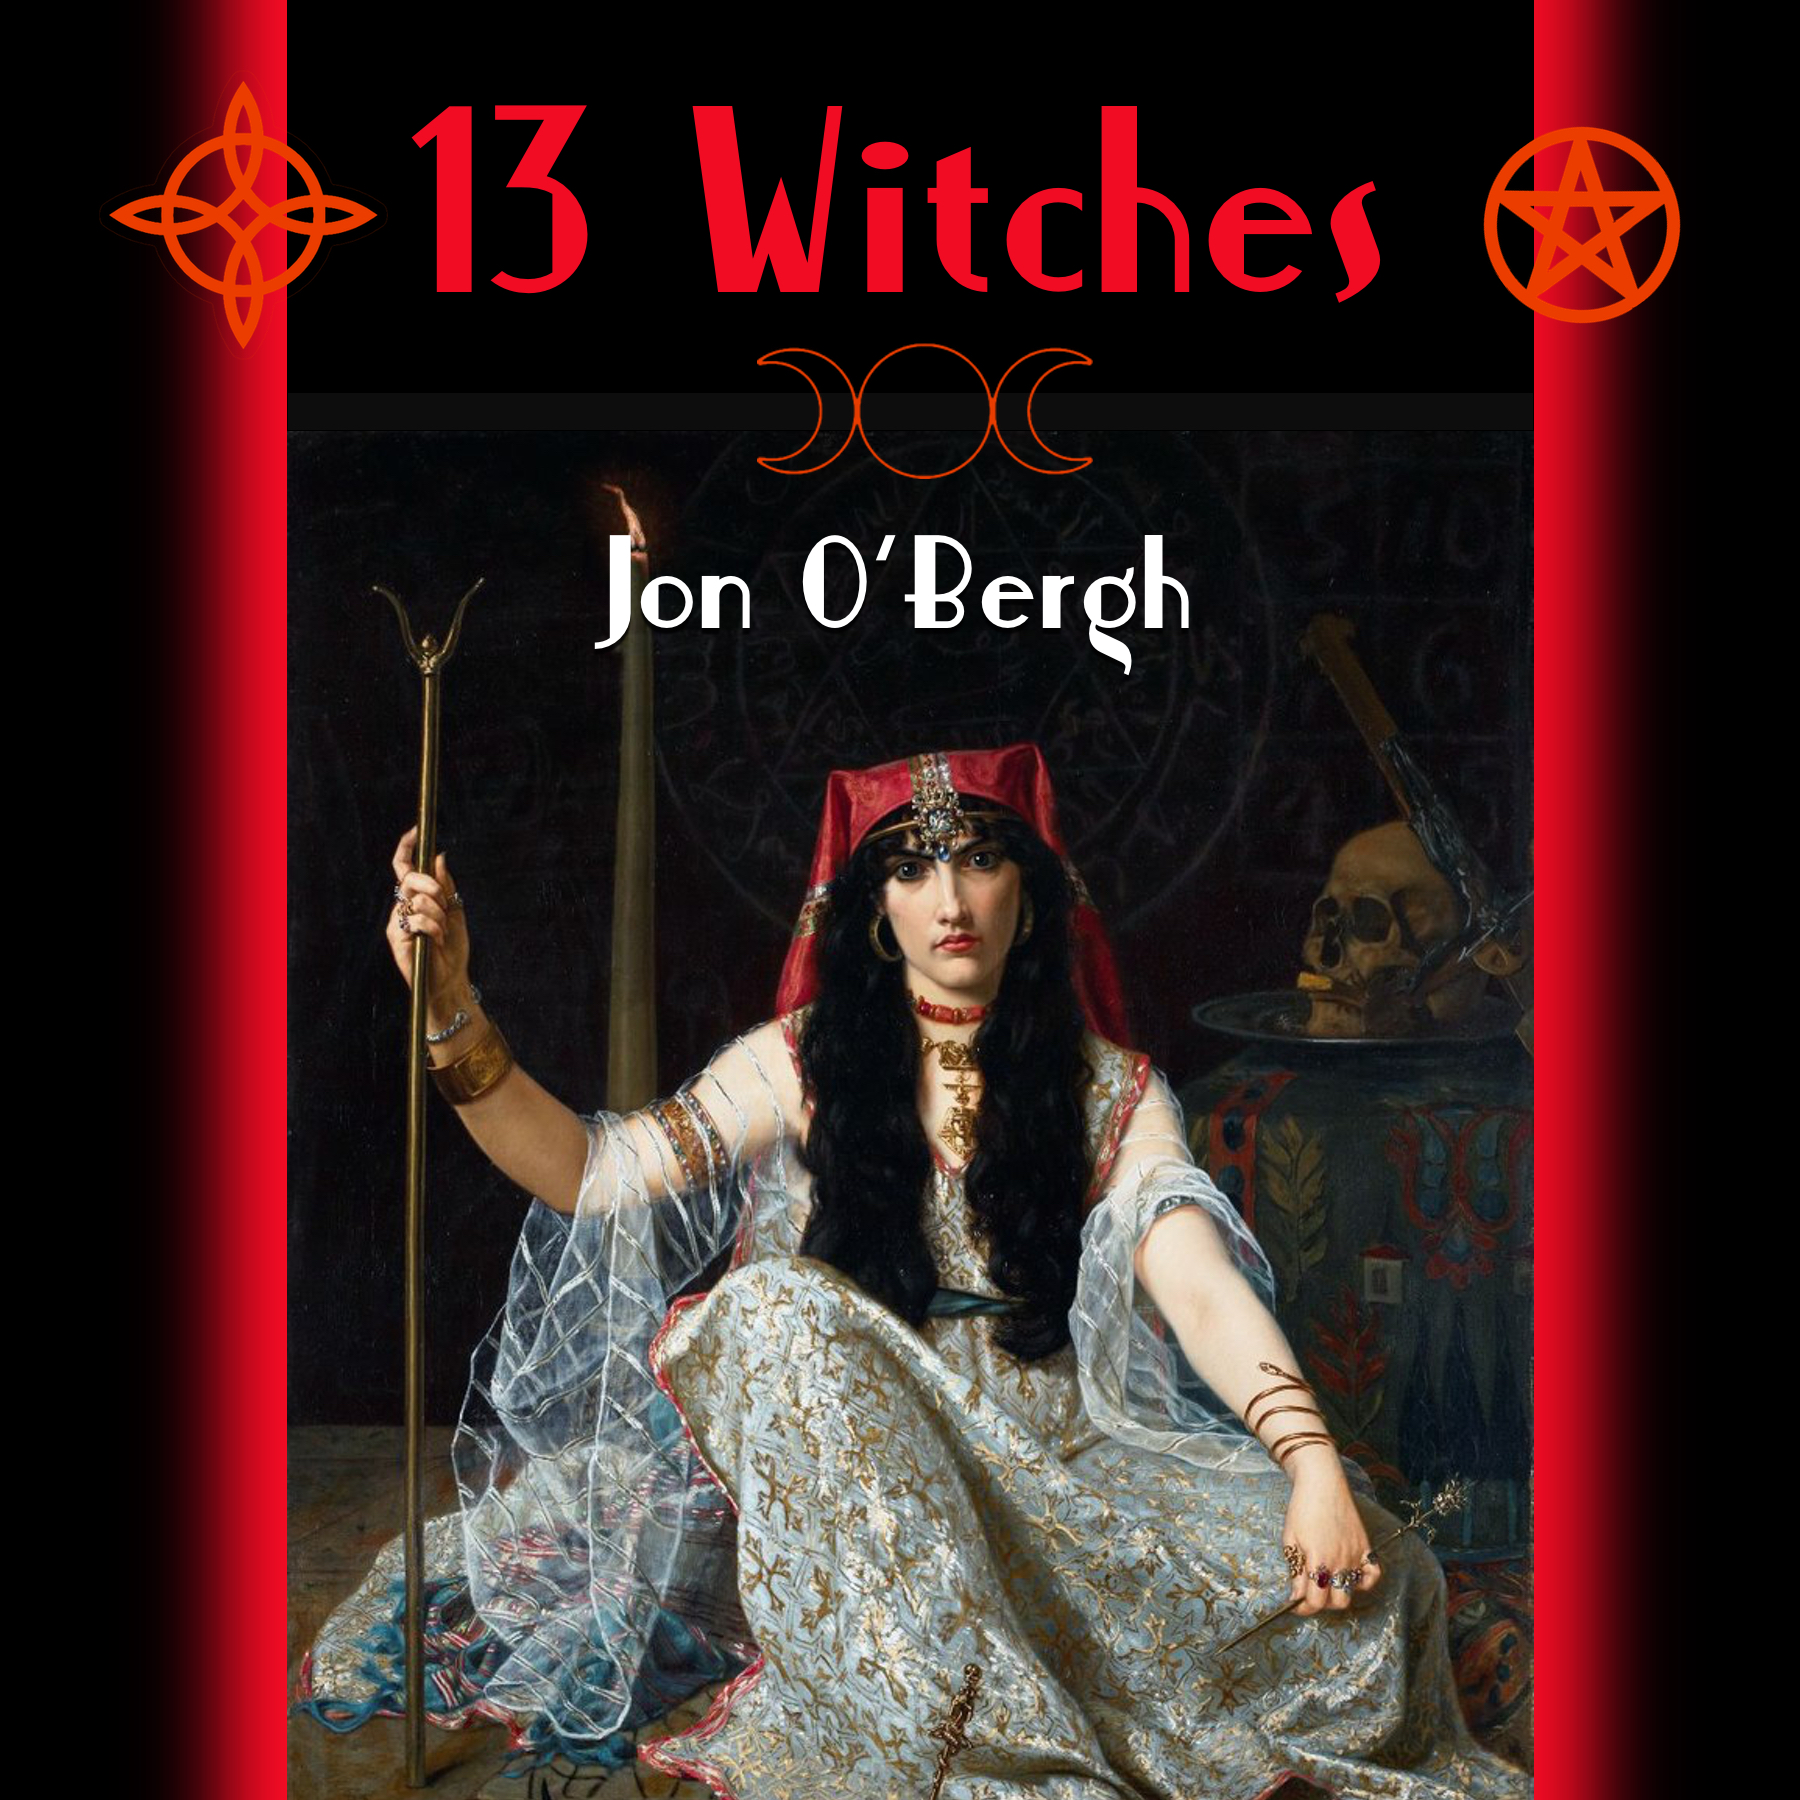 13 Witches